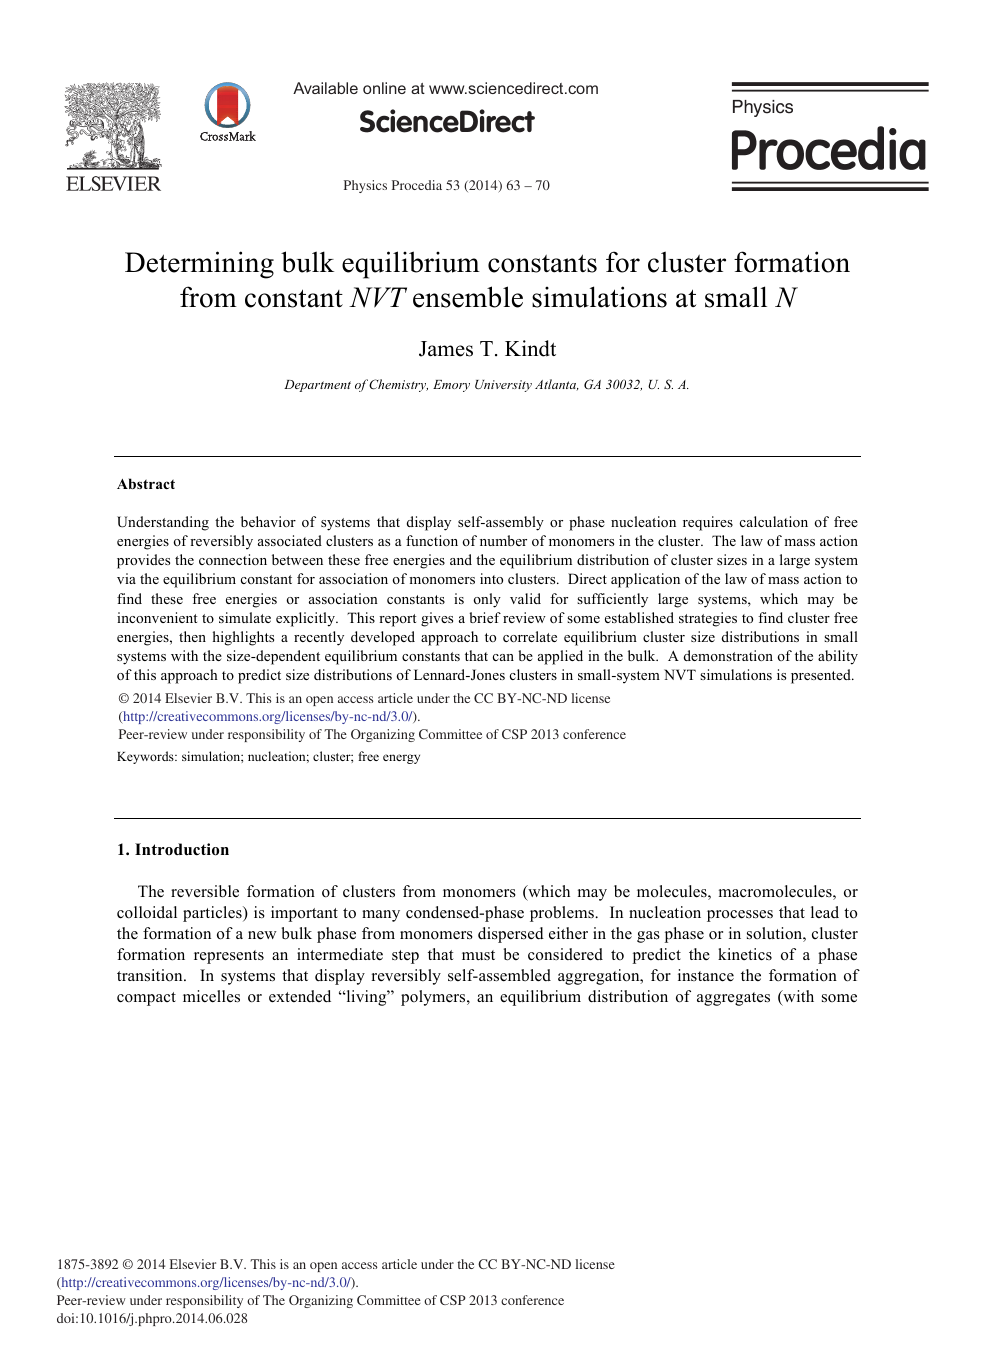 Determining Bulk Equilibrium Constants For Cluster Formation From Constant Nvt Ensemble Simulations At Small N Topic Of Research Paper In Physical Sciences Download Scholarly Article Pdf And Read For Free On